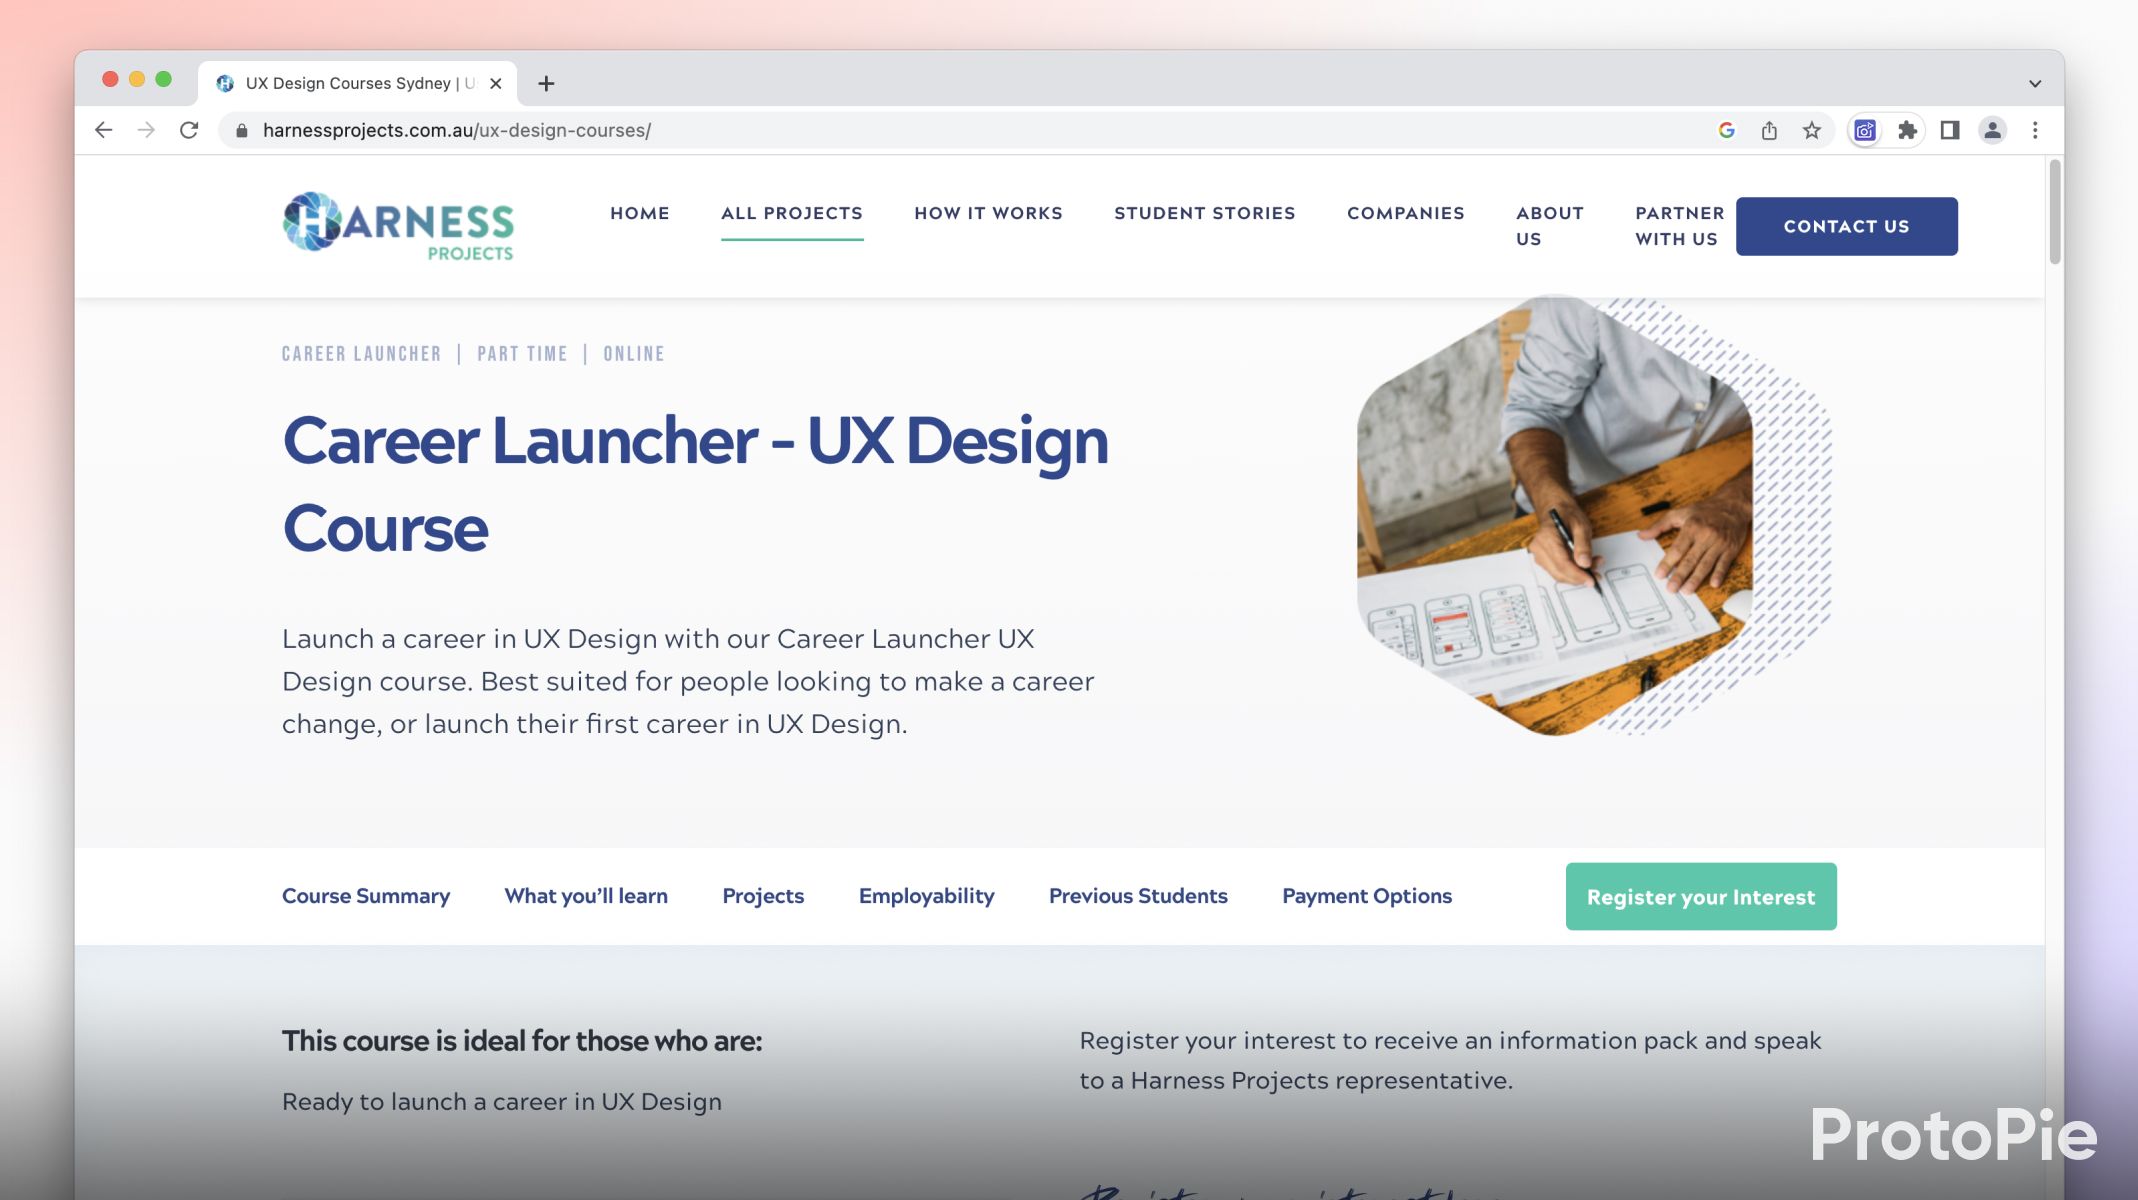 Career Launcher UX Design from Harness Projects website